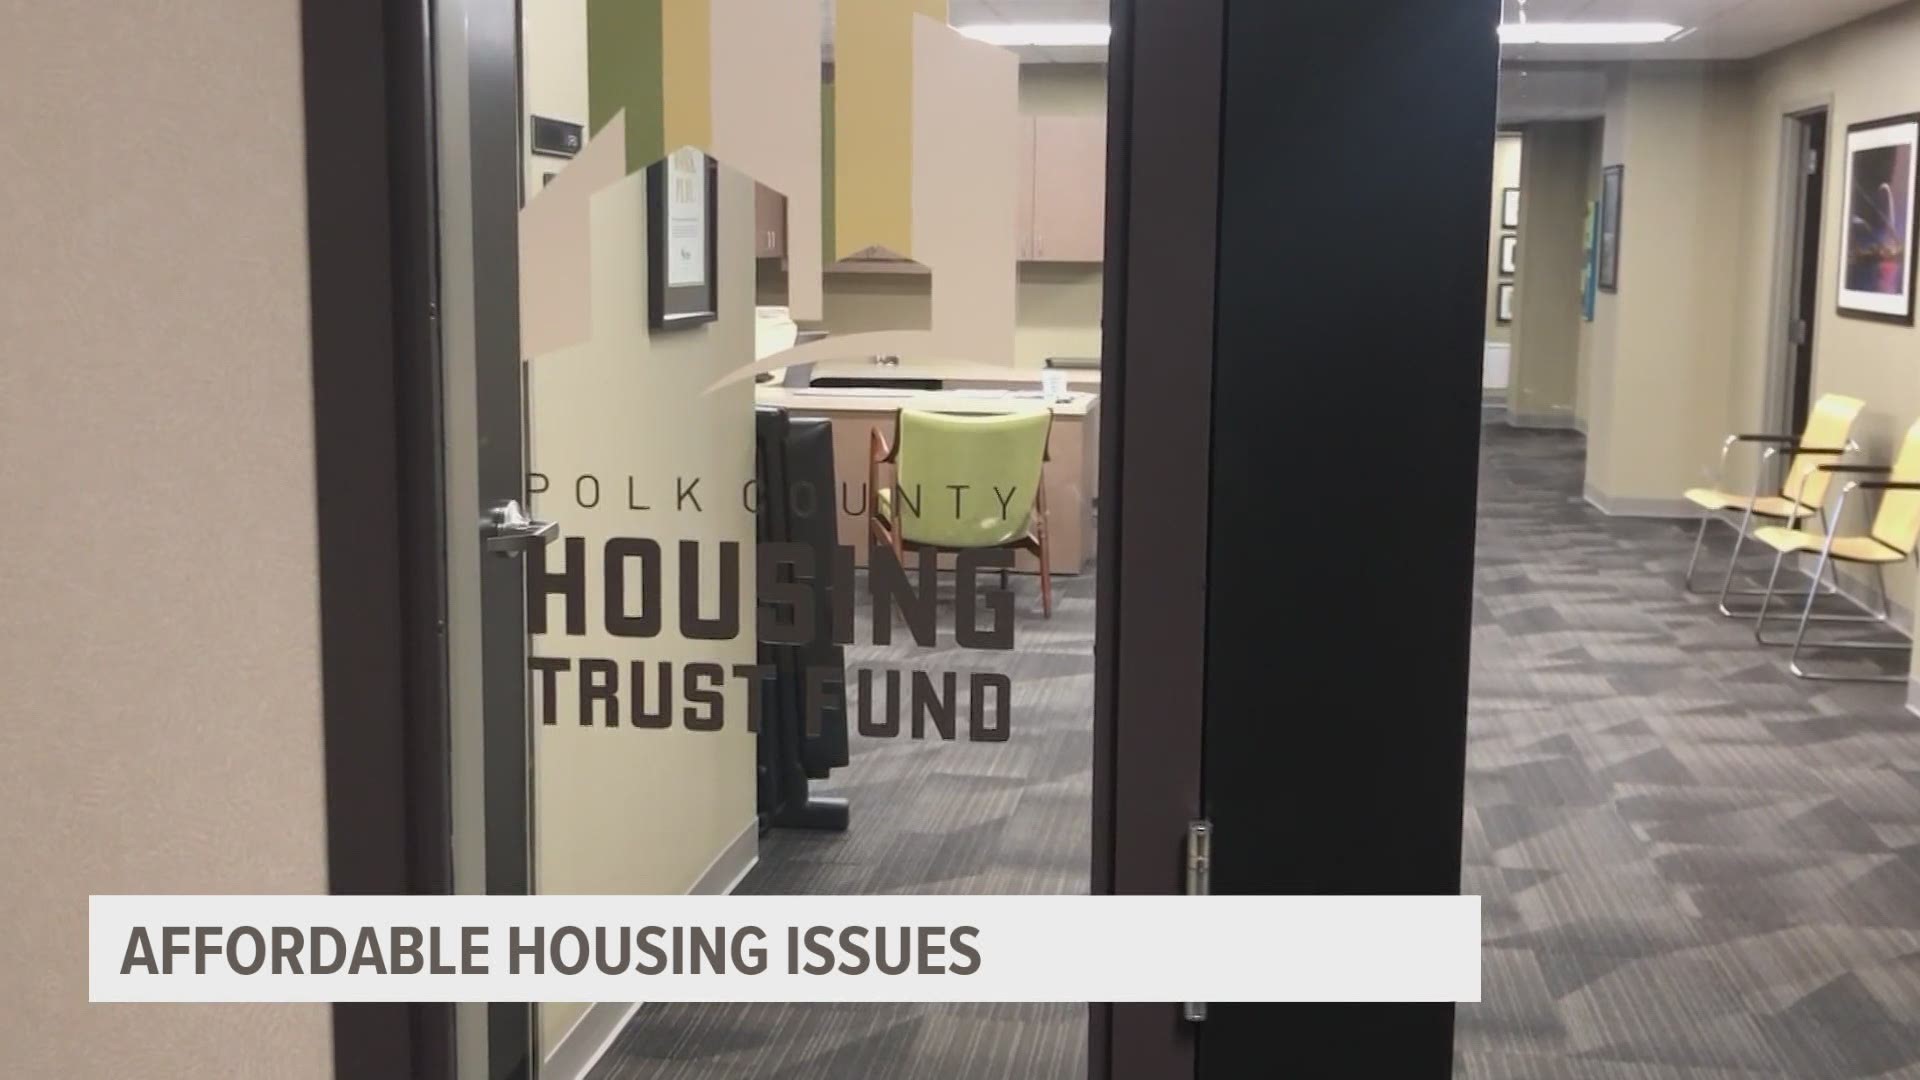 Polk County Housing Trust Fund discusses the importance of Affordable Housing week and strategies to bring more affordable housing to the area.